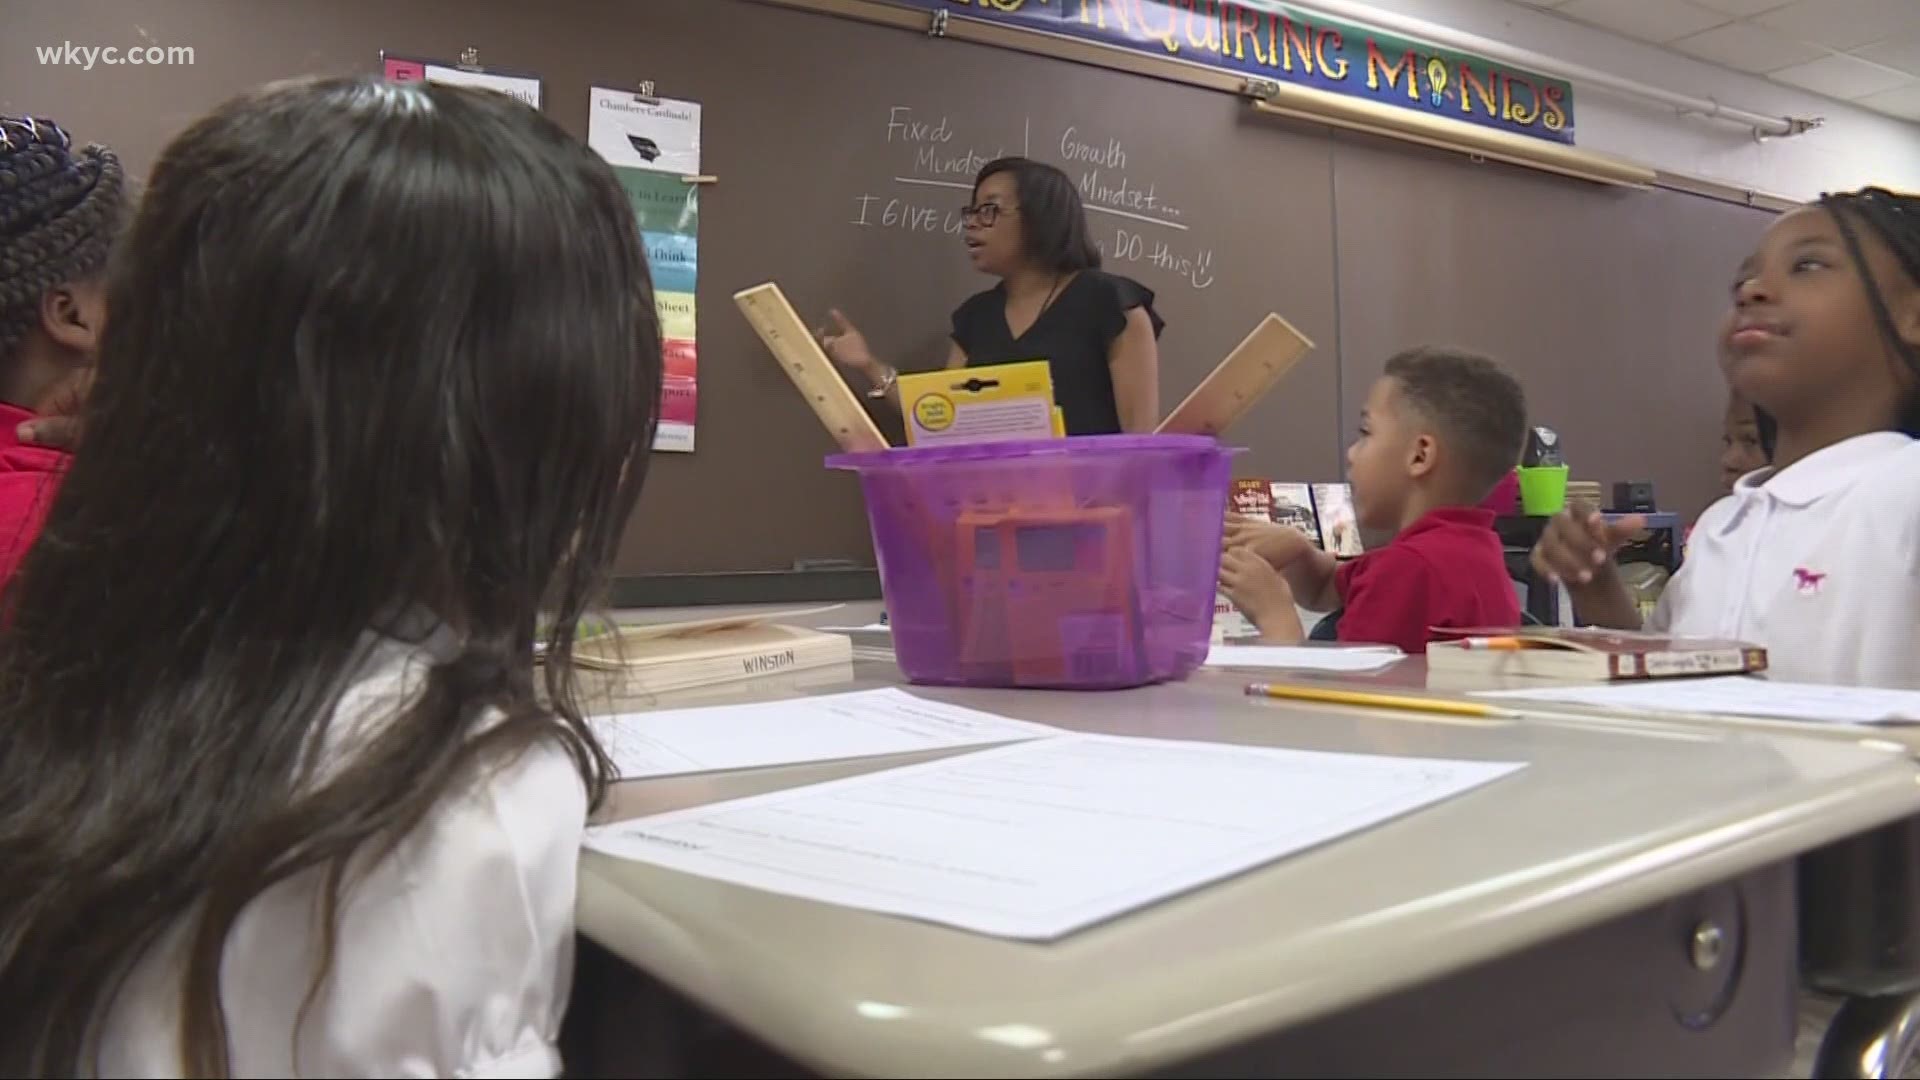 Gov. Mike DeWine wants districts to create plans to help students catch up by April 1. Laura Caso reports.